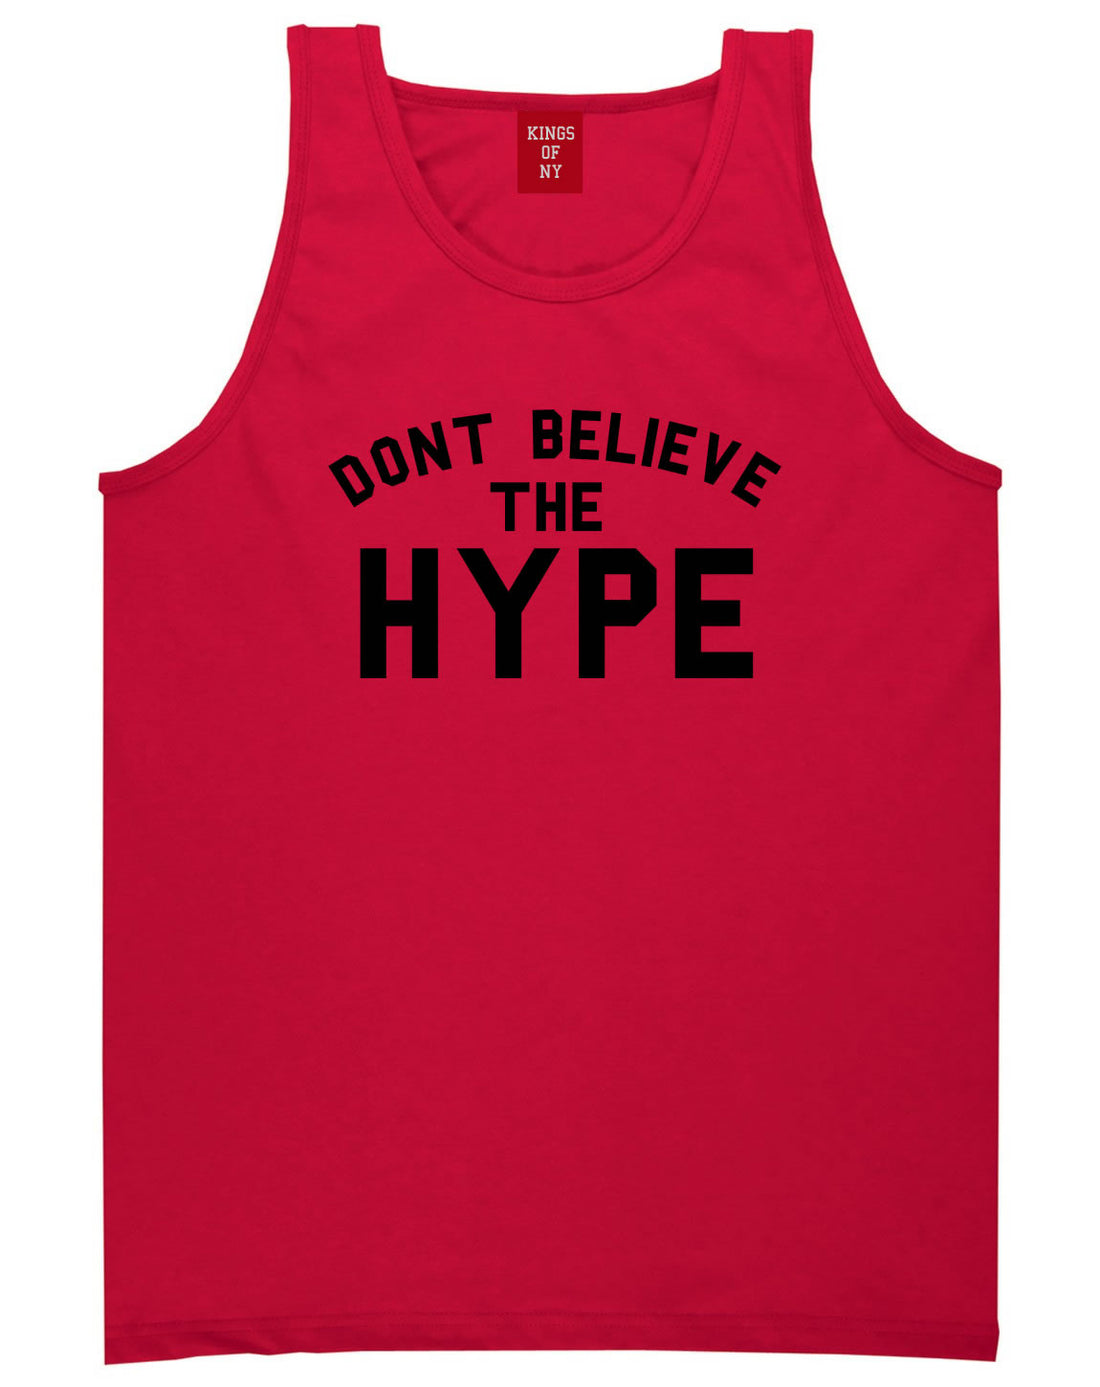 Don't Believe The Hype Tank Top in Red By Kings Of NY